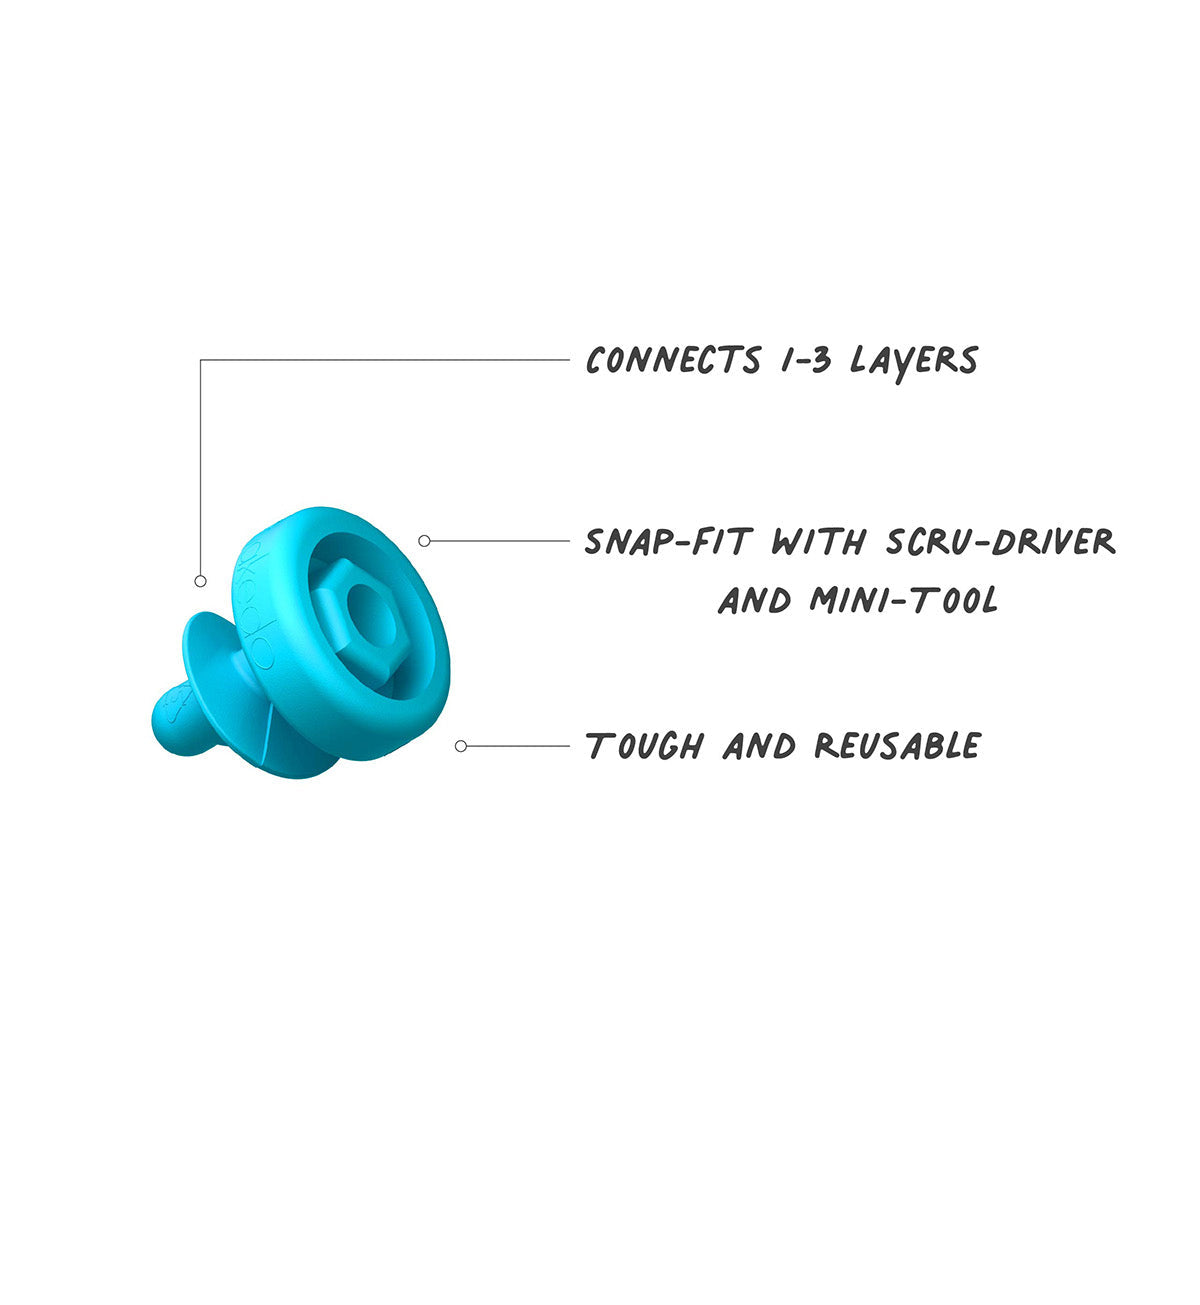 Makedo Scru connector with features Image